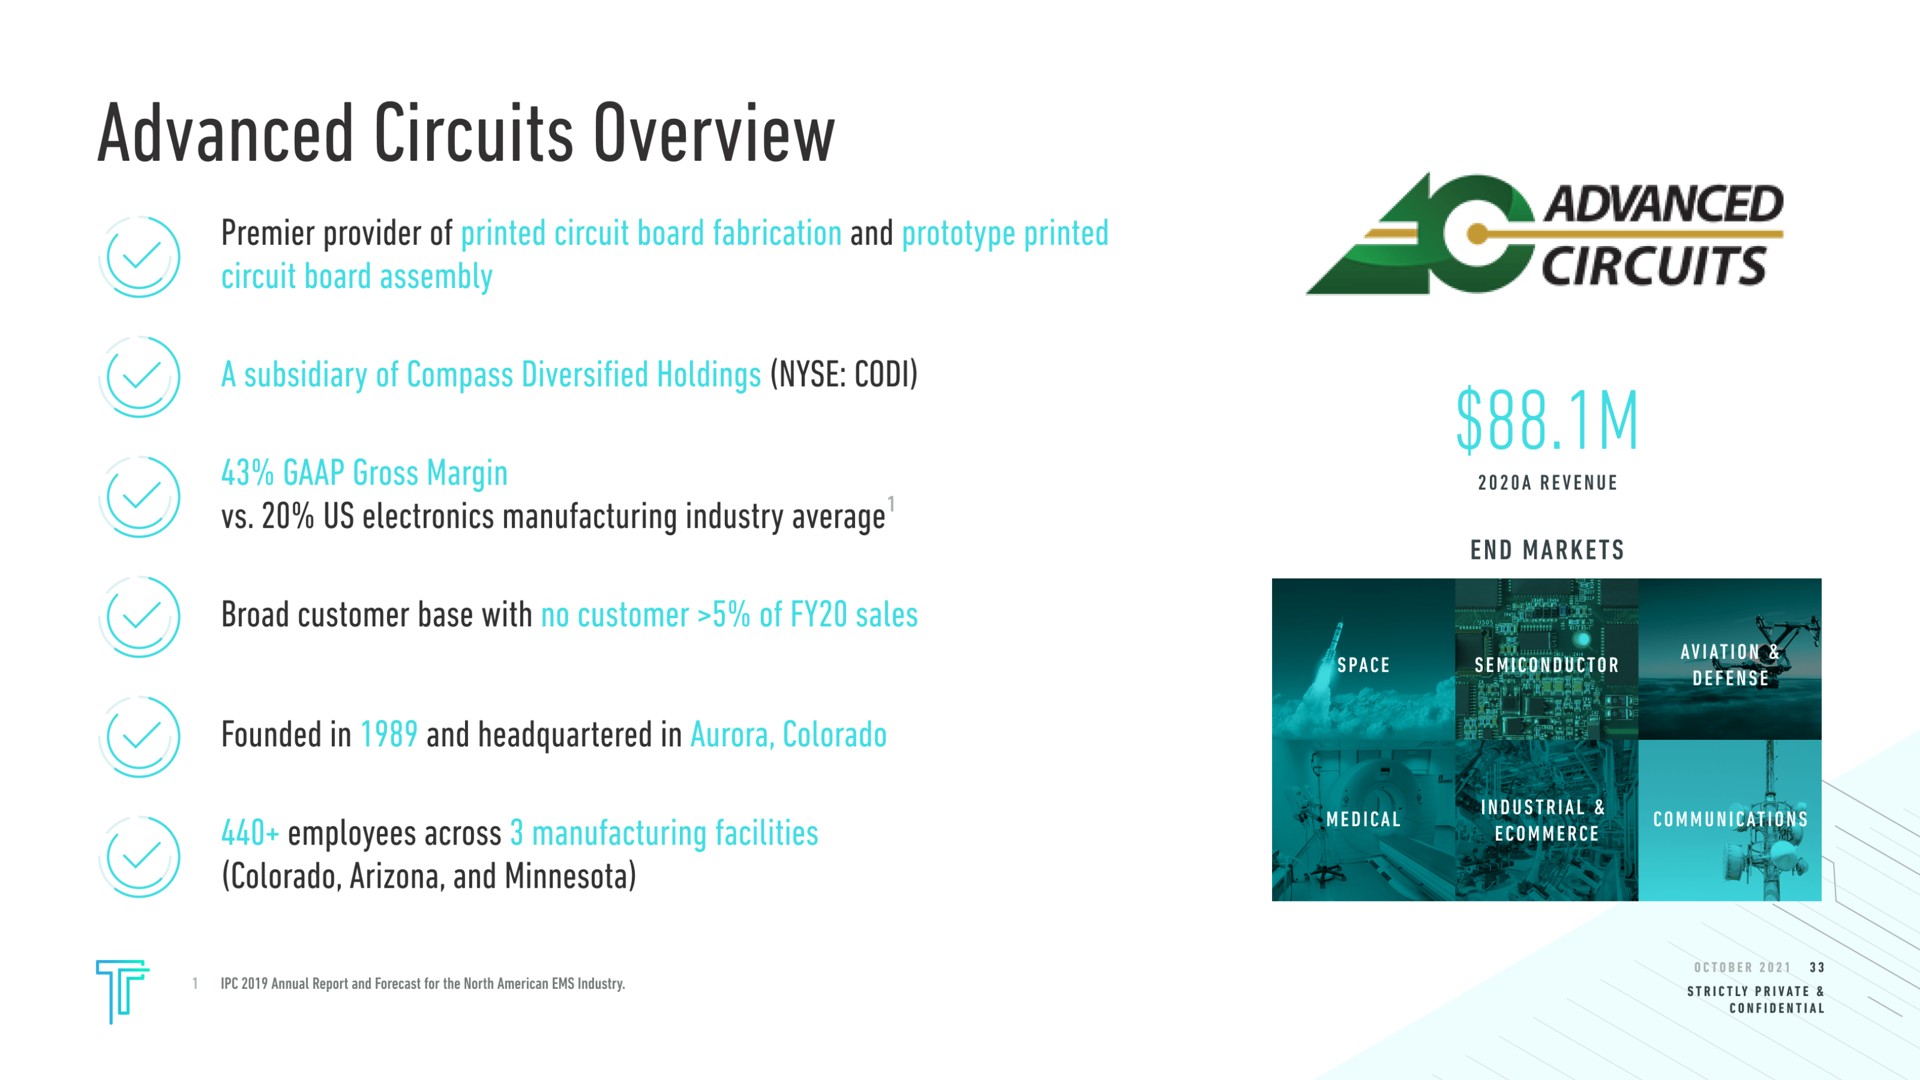 advanced circuits overview a premier provider of and us electronics manufacturing industry average broad customer base with founded in and headquartered in employees across colorado and advanced anes end markets | Tempo